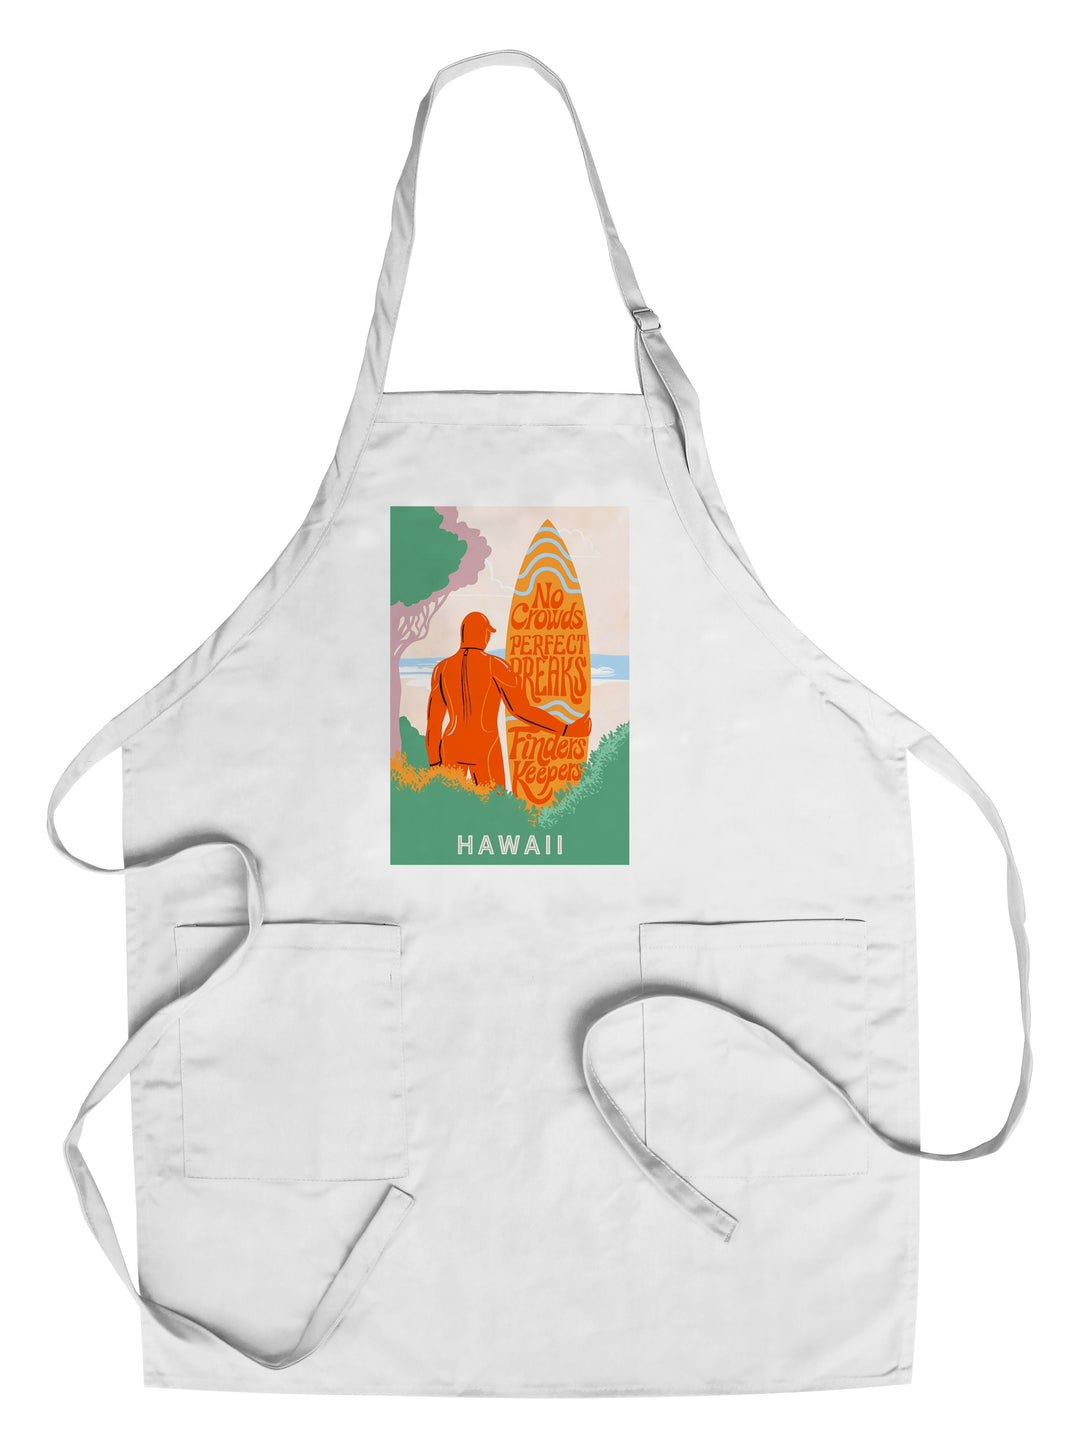 Hawaii, Secret Surf Spot Collection, Surfer at the Beach, No Crowds, Perfect Breaks, Finders Keepers, Lantern Press Artwork, Towels and Aprons Kitchen Lantern Press Chef's Apron 